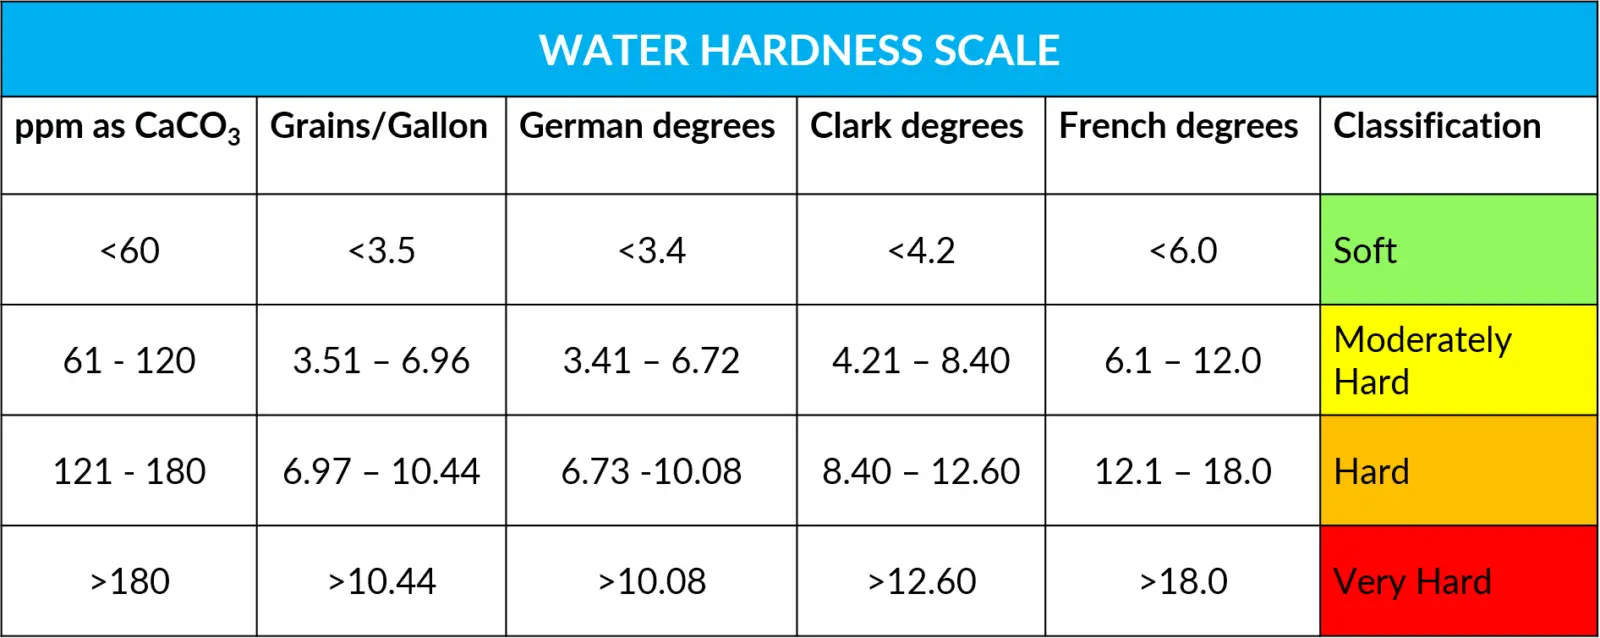 water hardness scale 